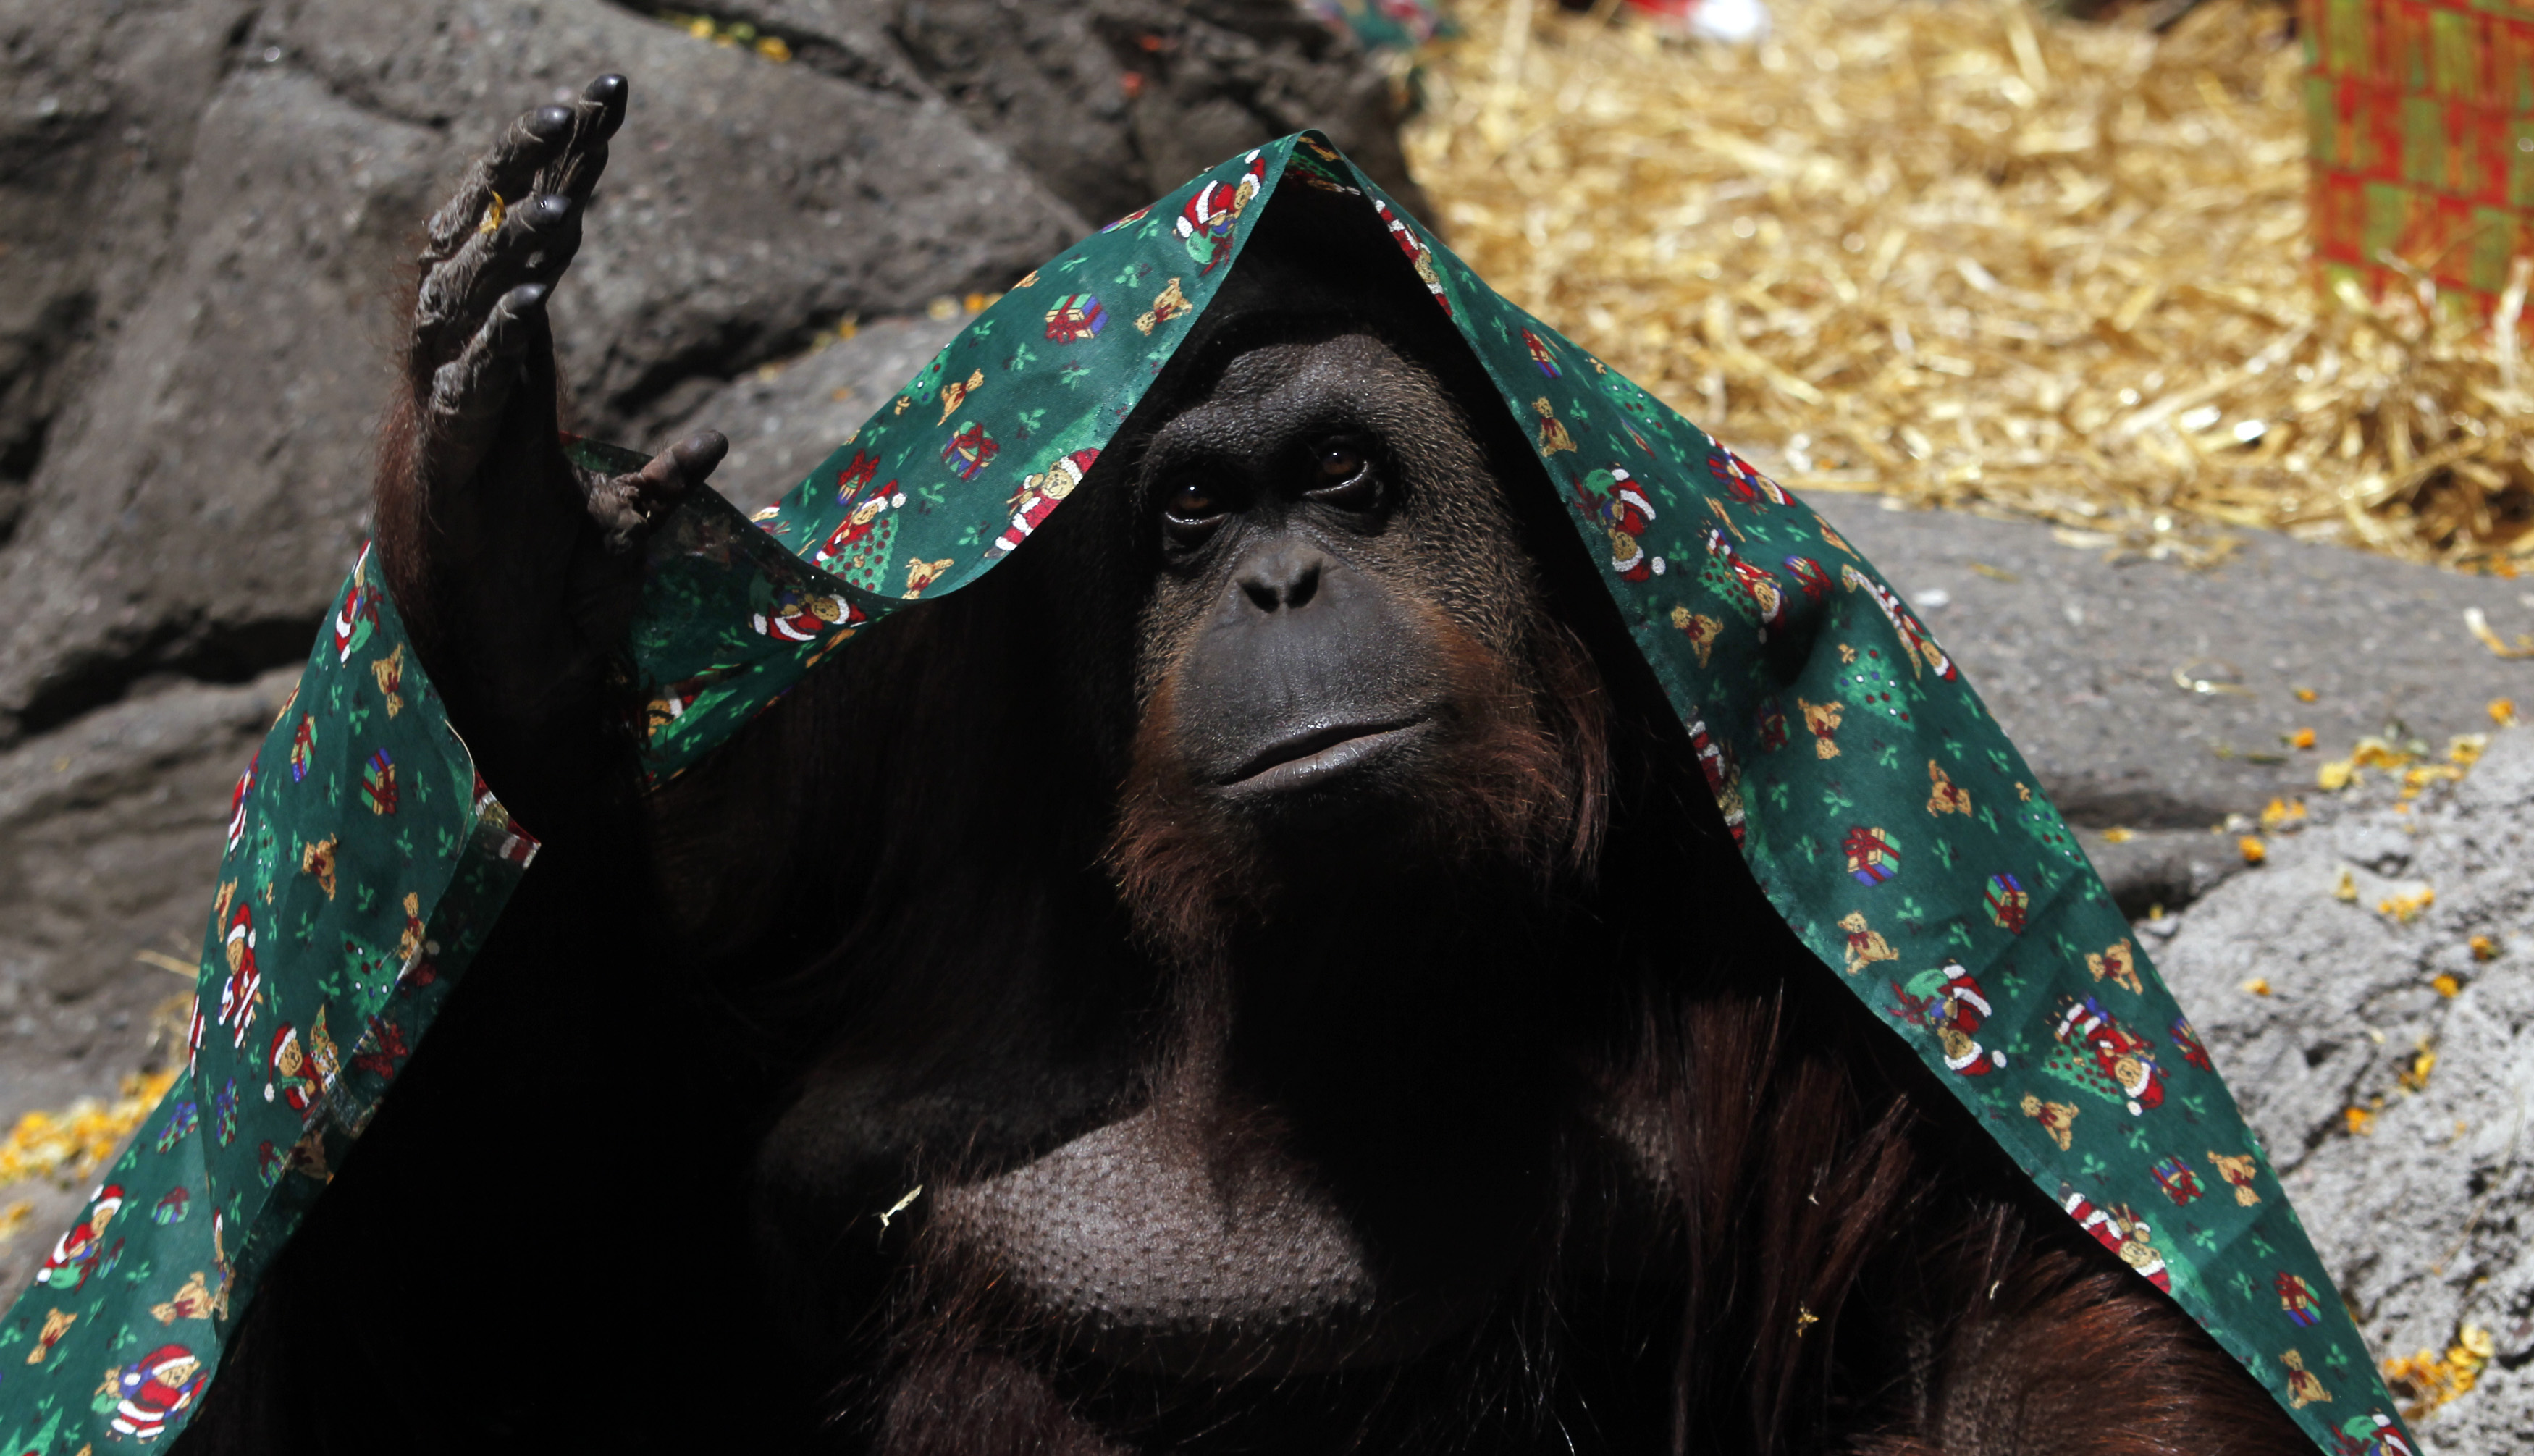 An orangutan named Sandra, covered with a blanket, gestures inside its cage at Buenos Aires' Zoo, December 8, 2010. (Marcos Brindicci—Reuters)